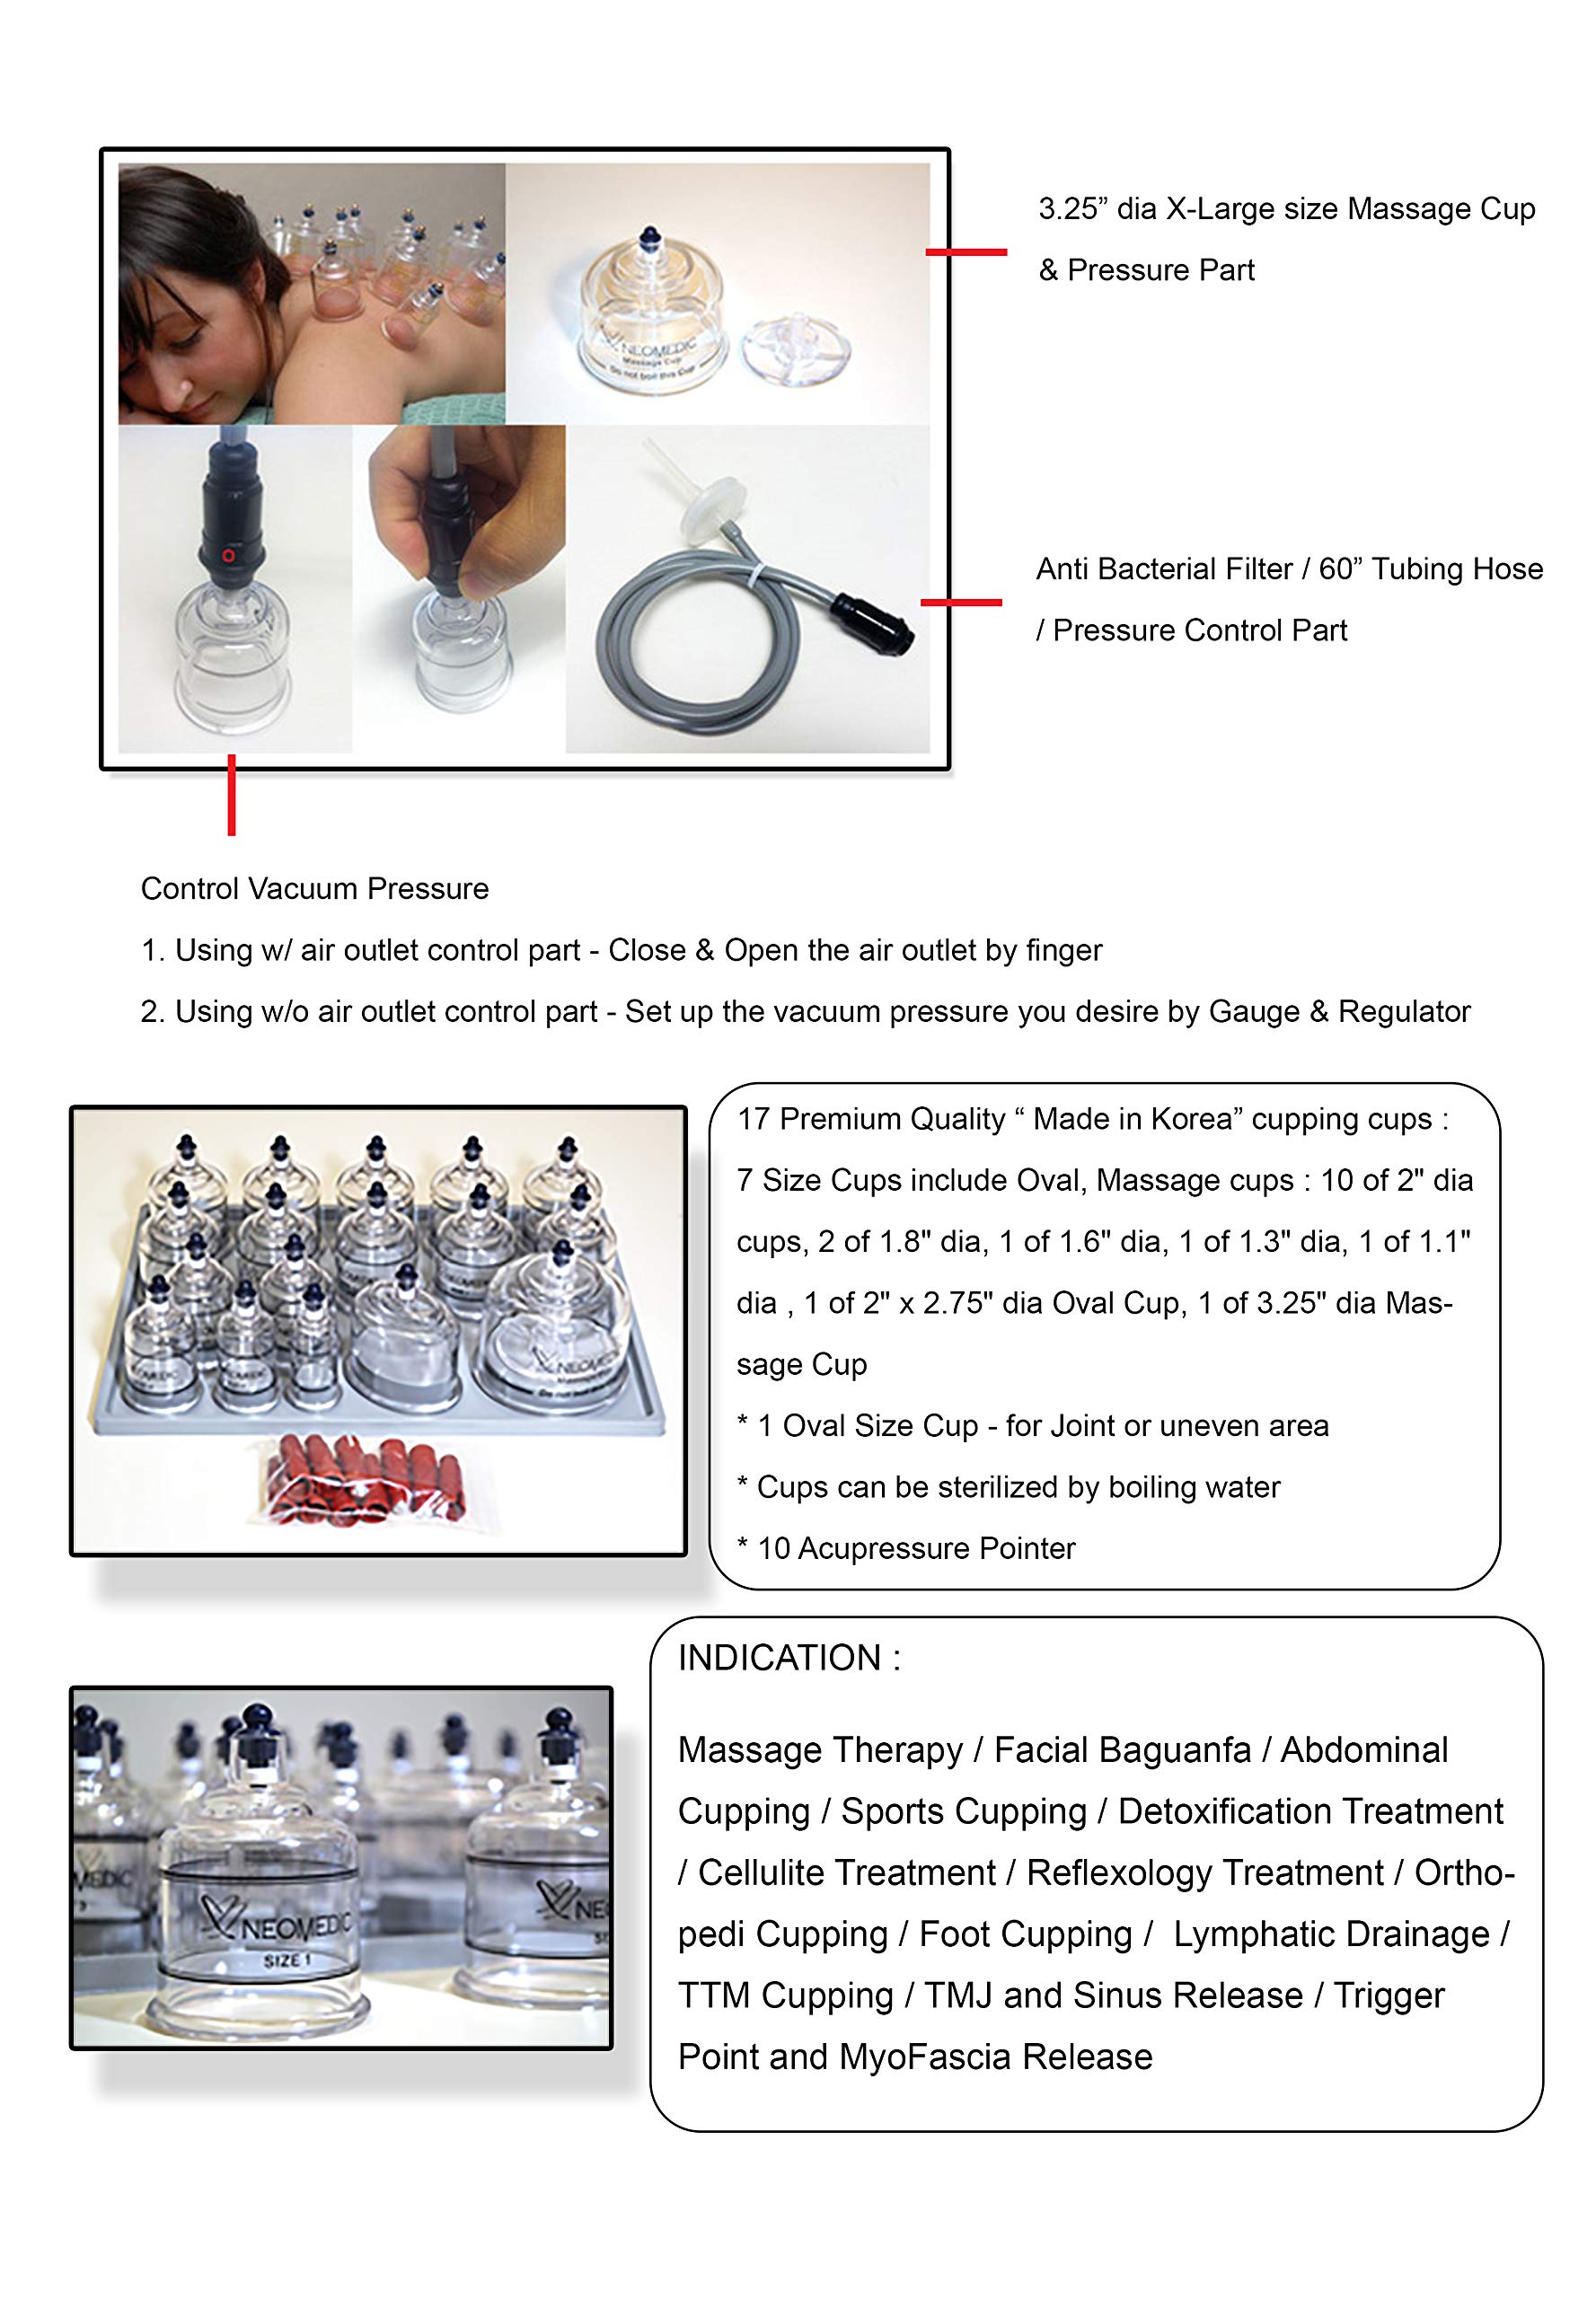 Professional Electric Automatic Cupping Set Complete Set